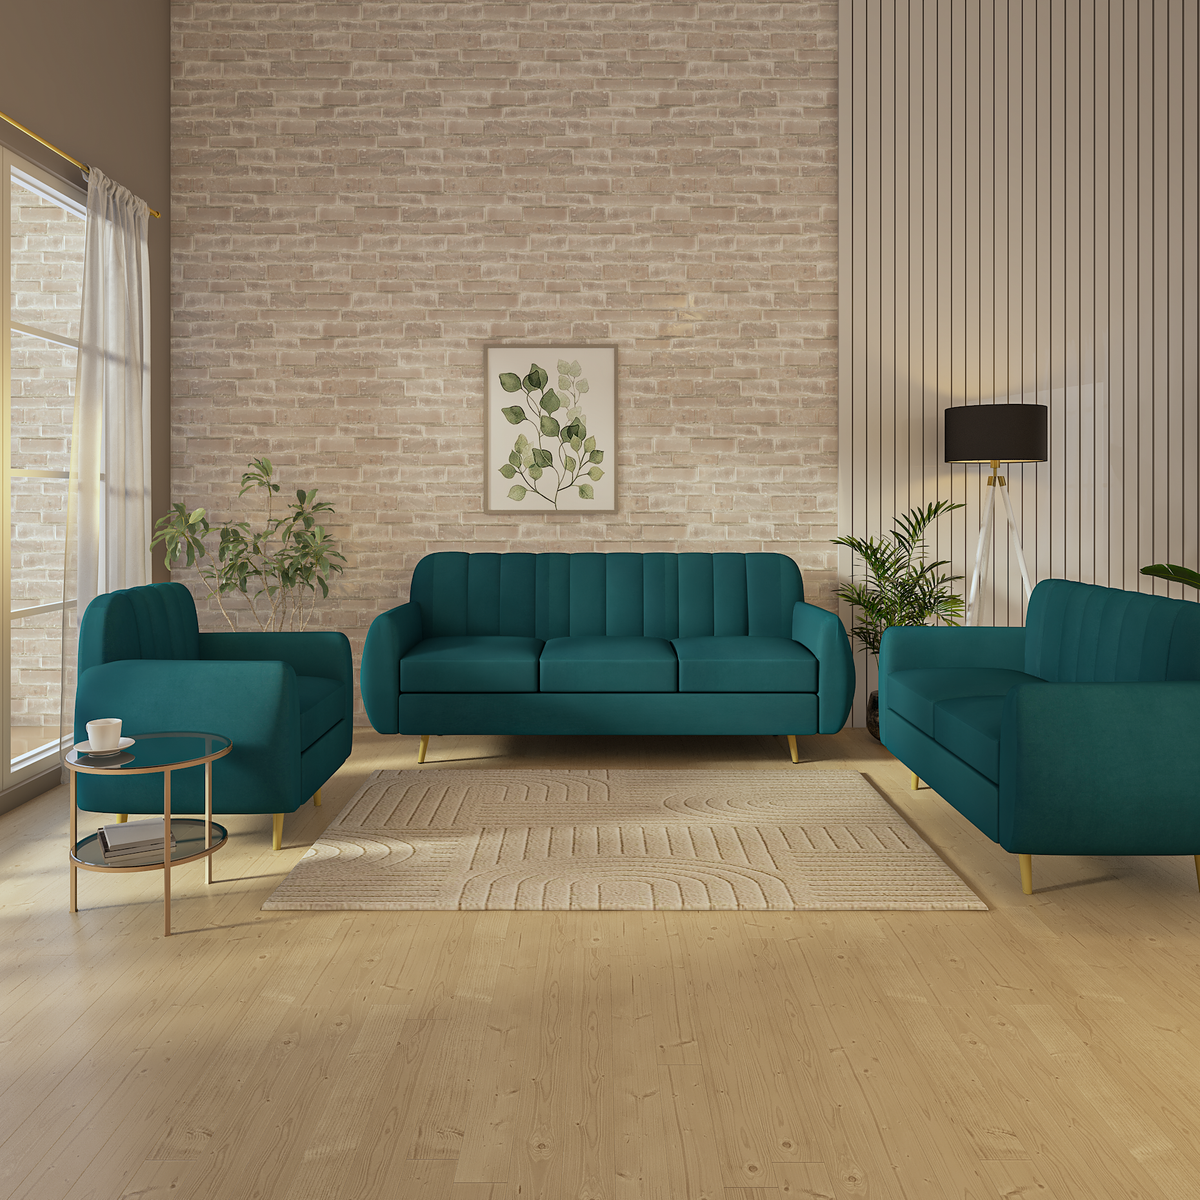 Redefining the sofa experience: maximum comfort and flexibility